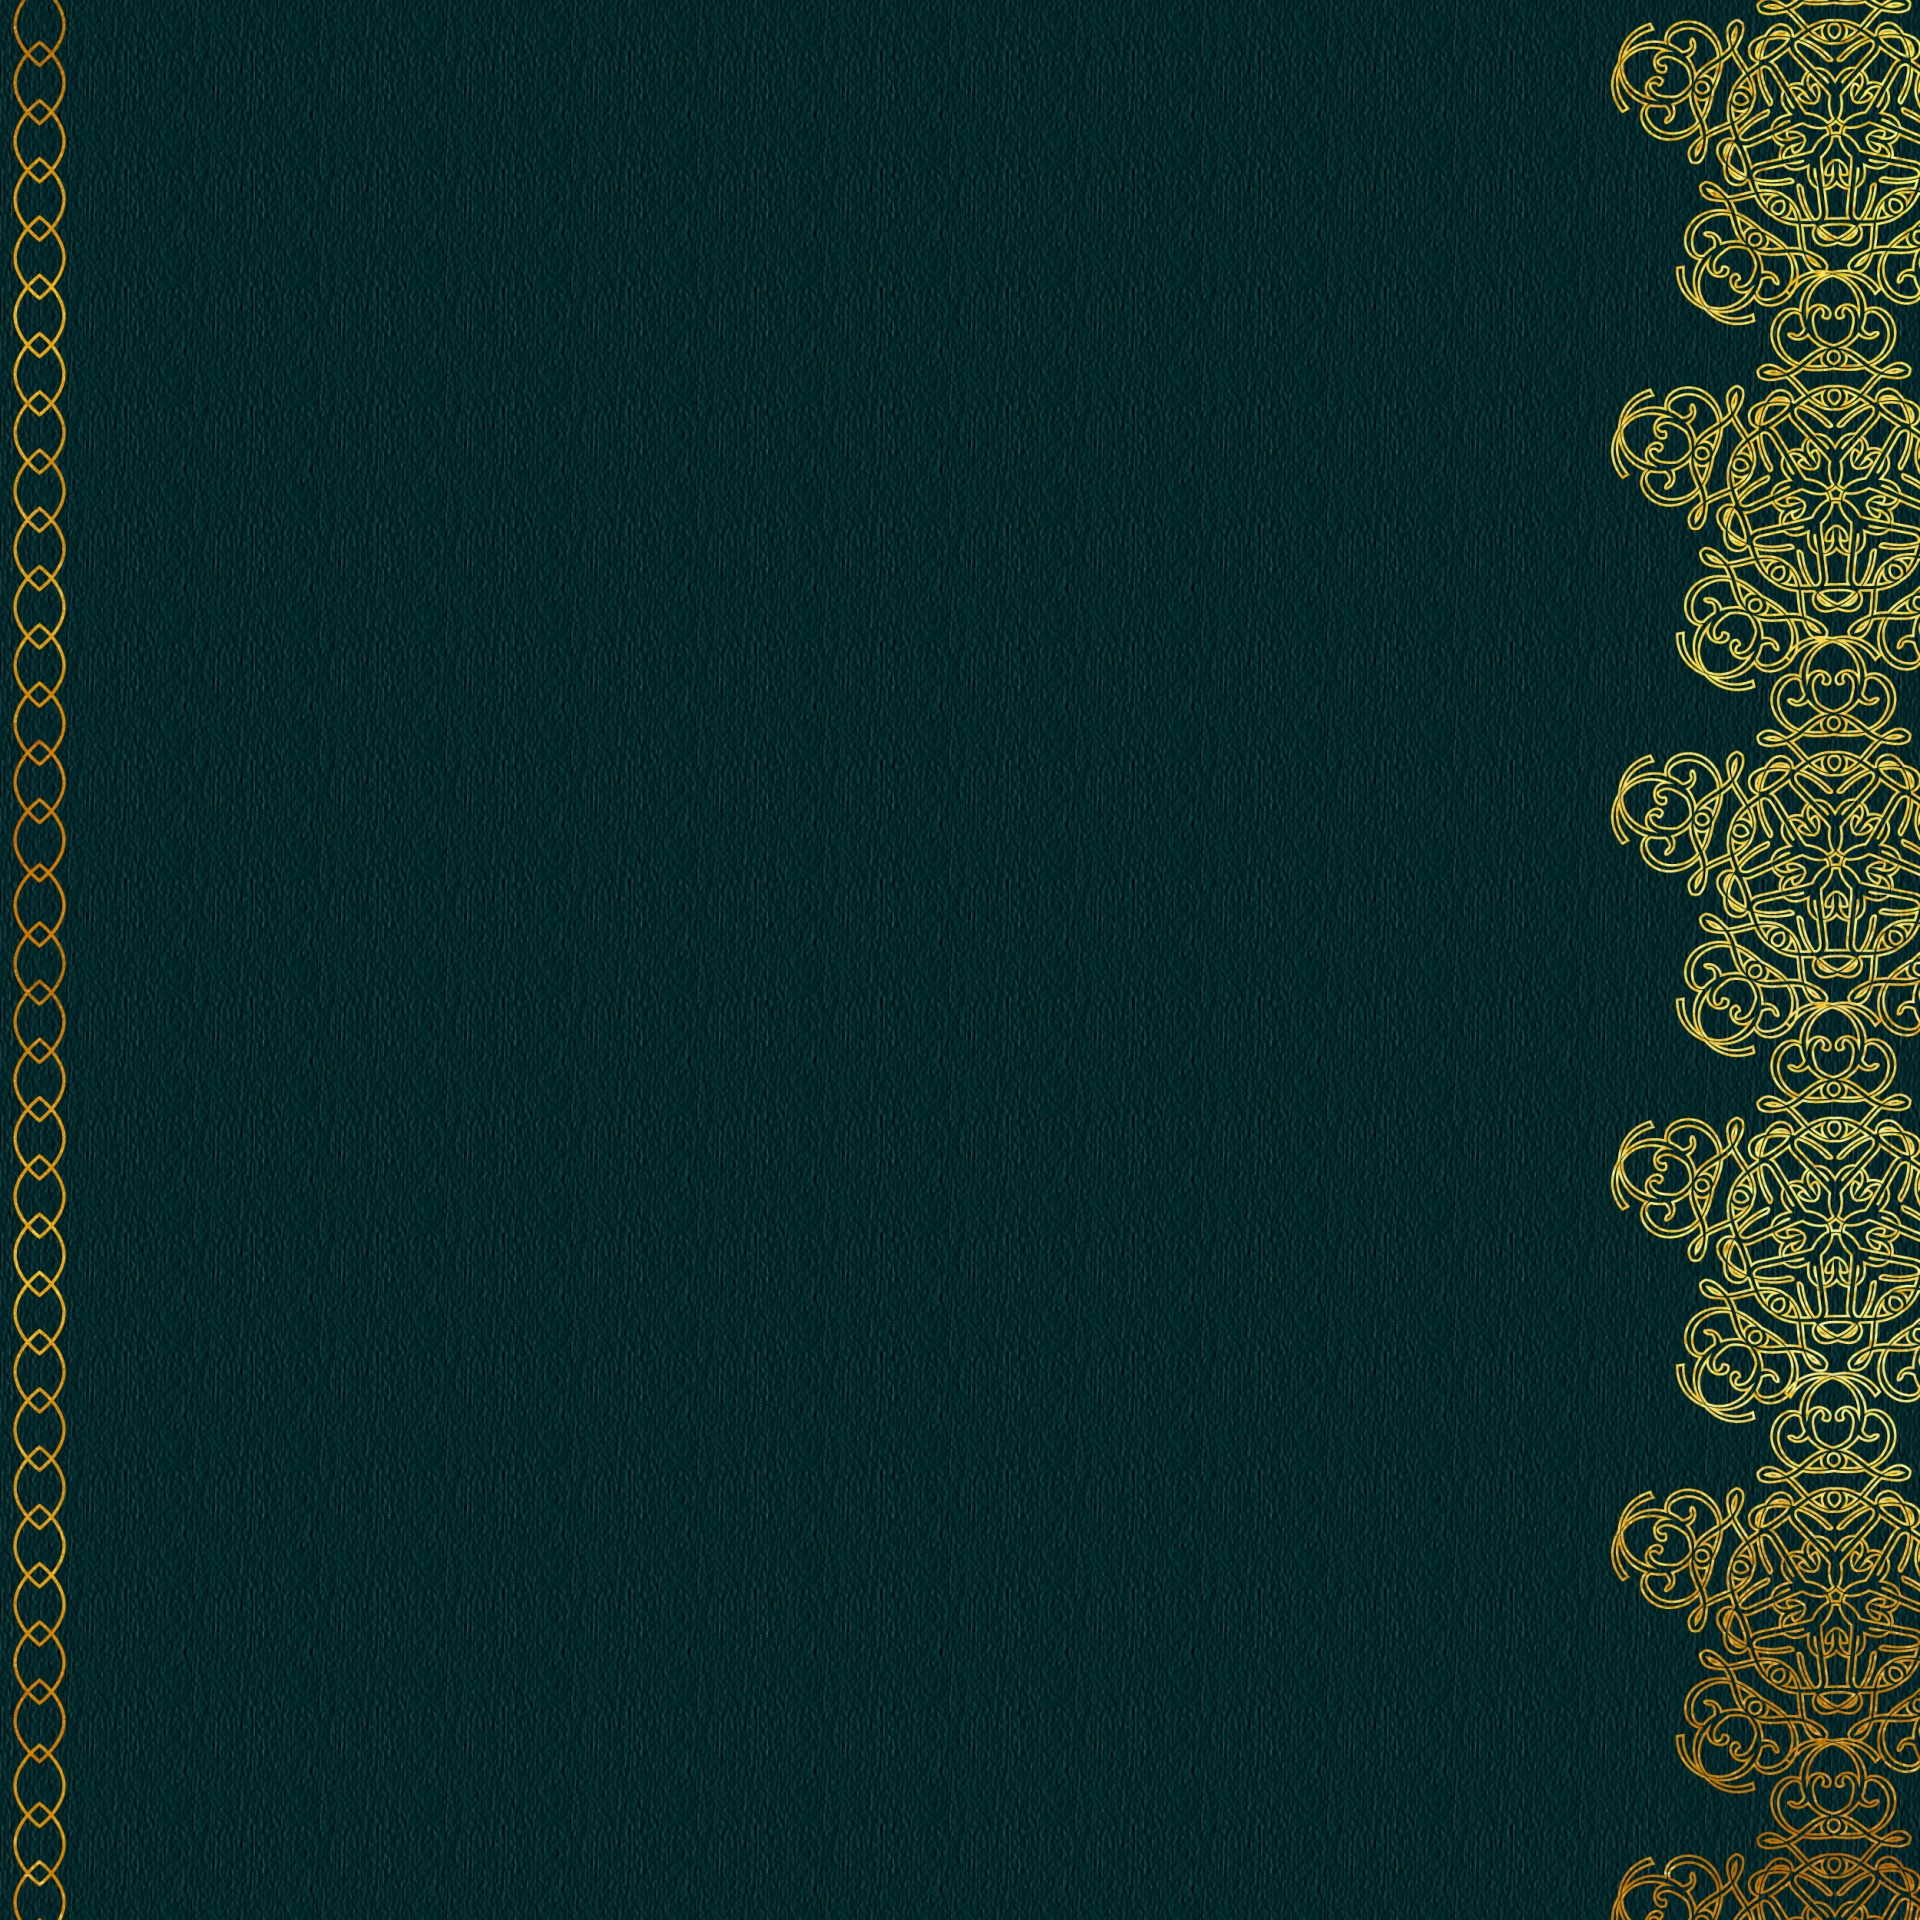 Green lace embroidered islamic elegant wallpapers